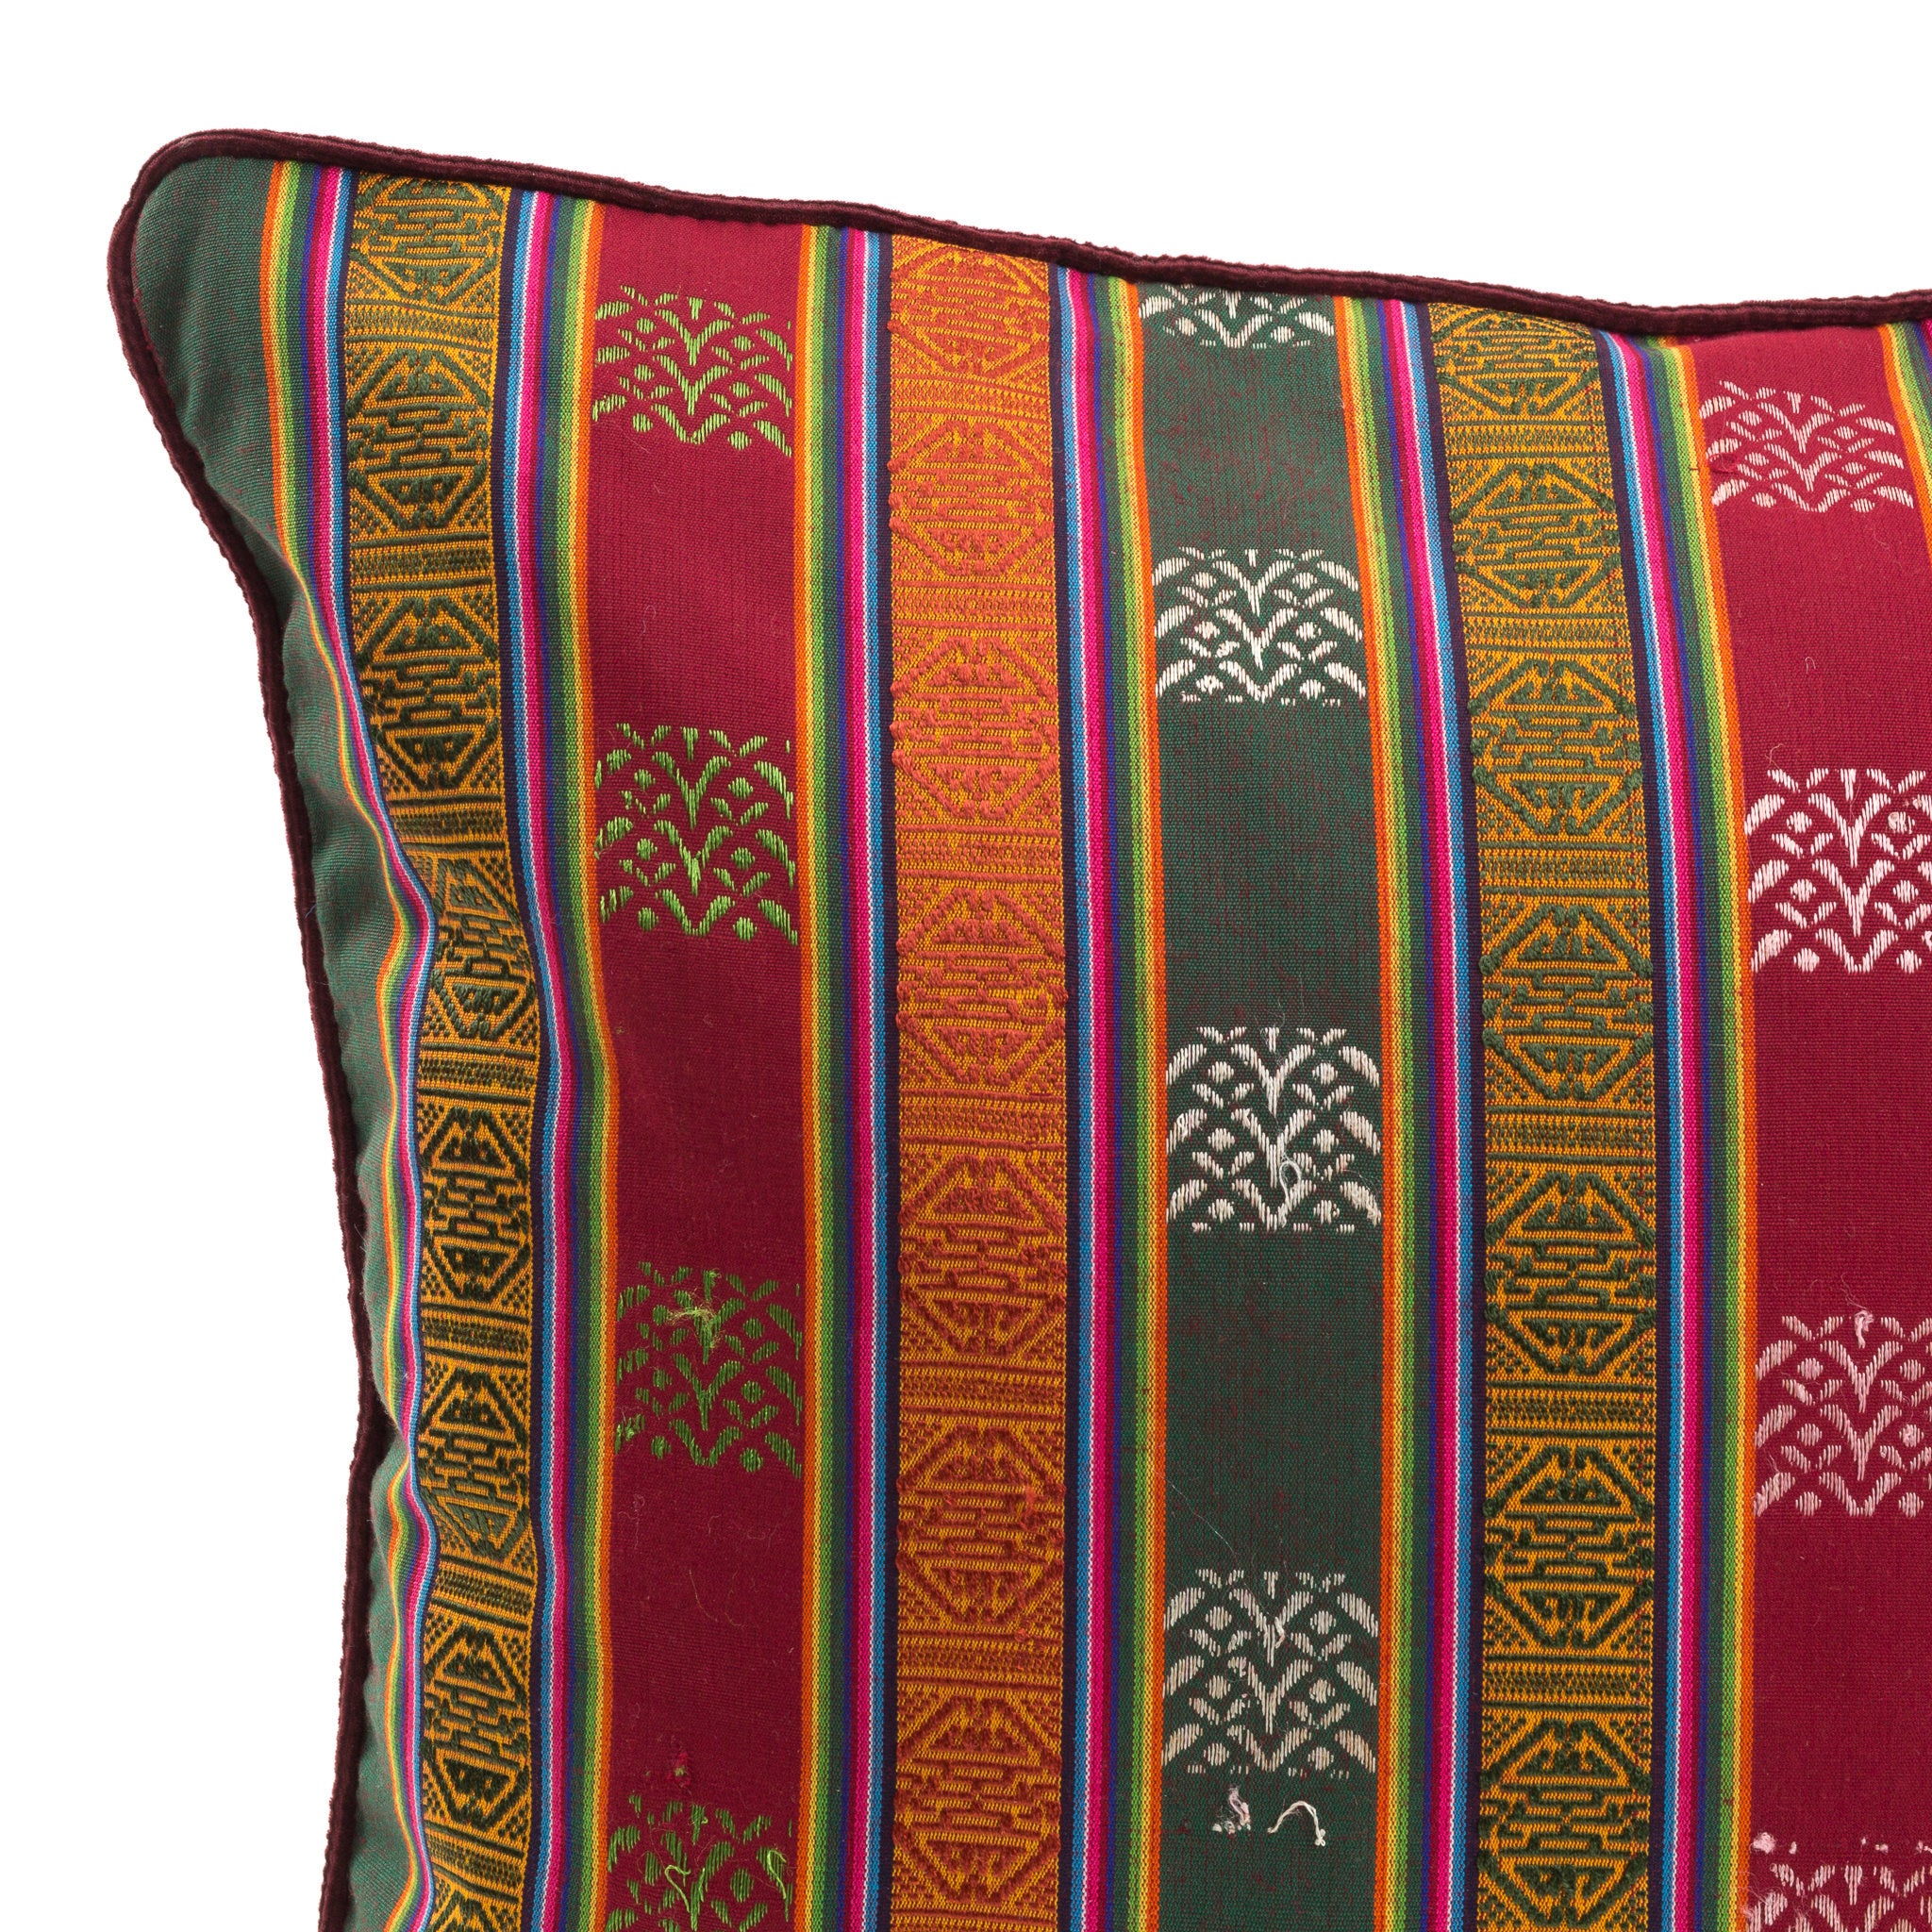 Burgundy Red, Green and Orange Striped Handwoven Scatter Square Cushion from Bhutan - DETAIL